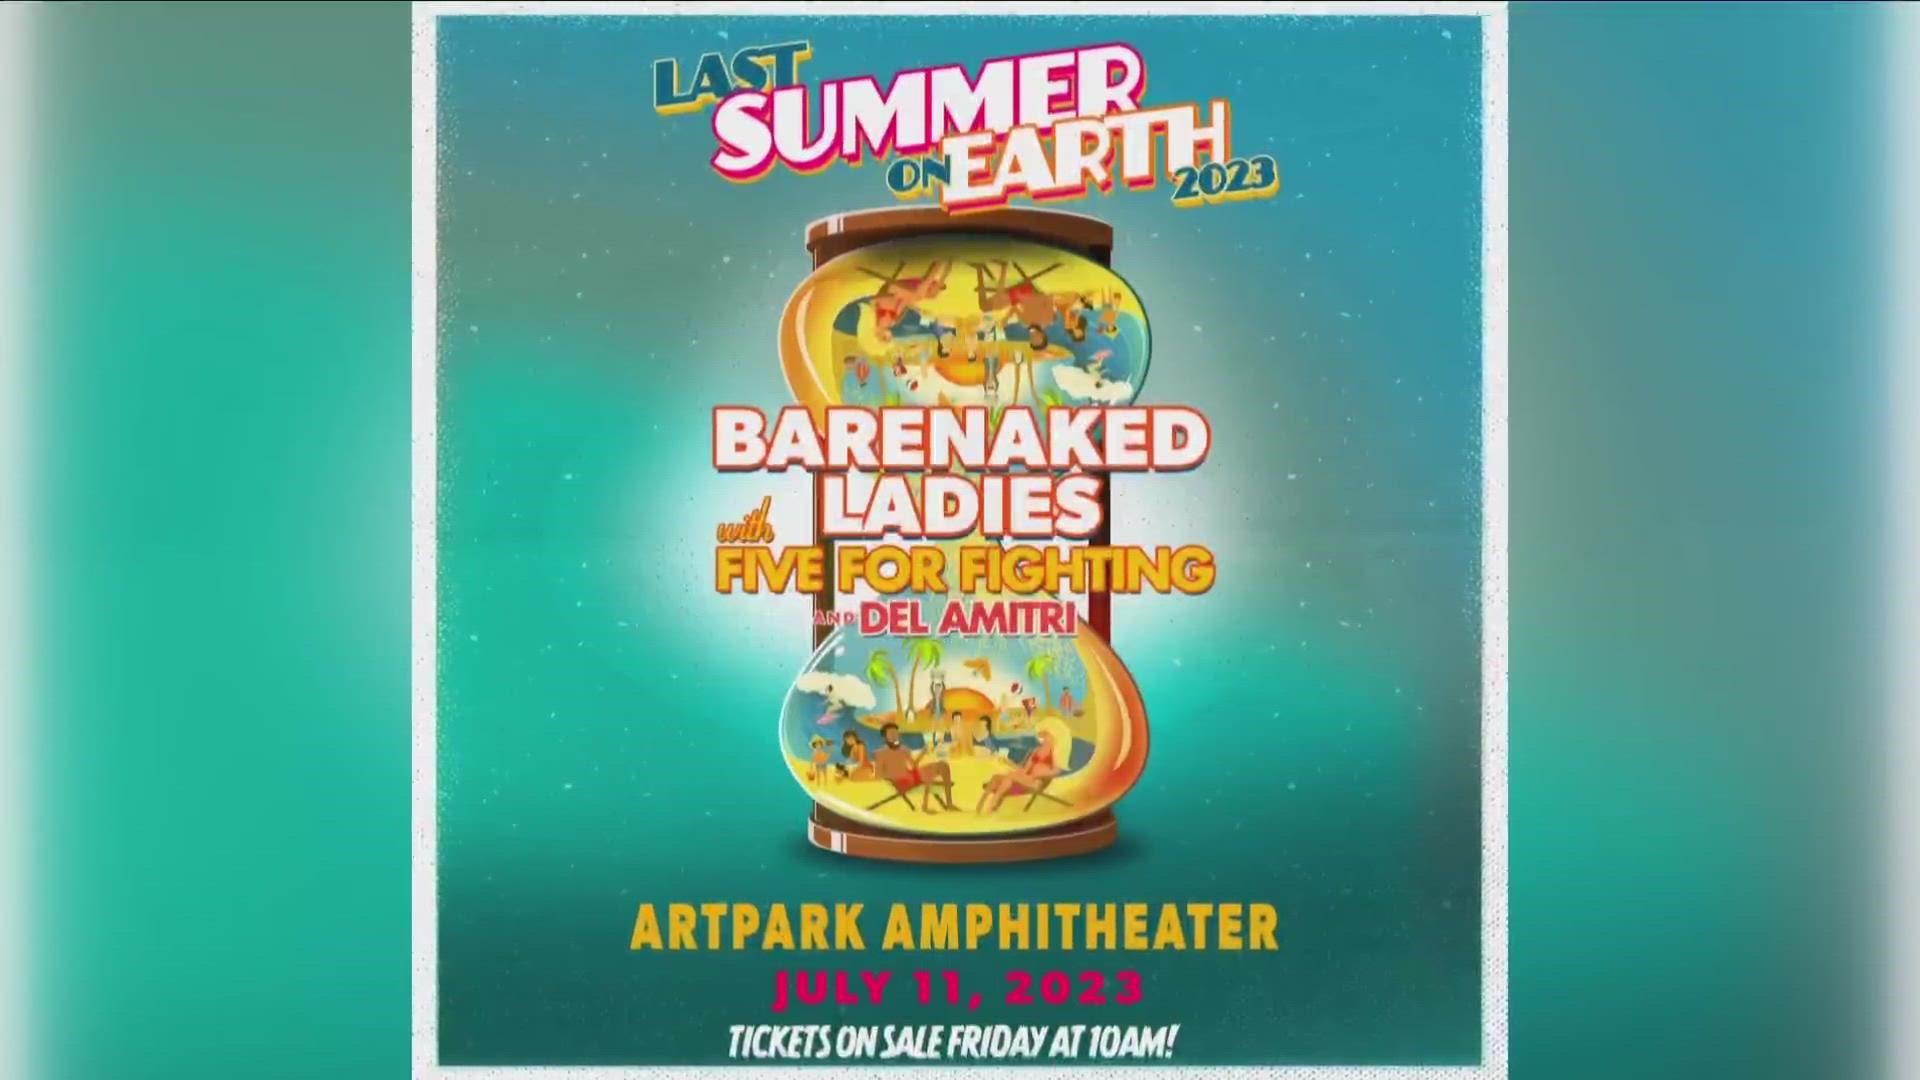 BareNaked Ladies coming to Artpark on July 11th